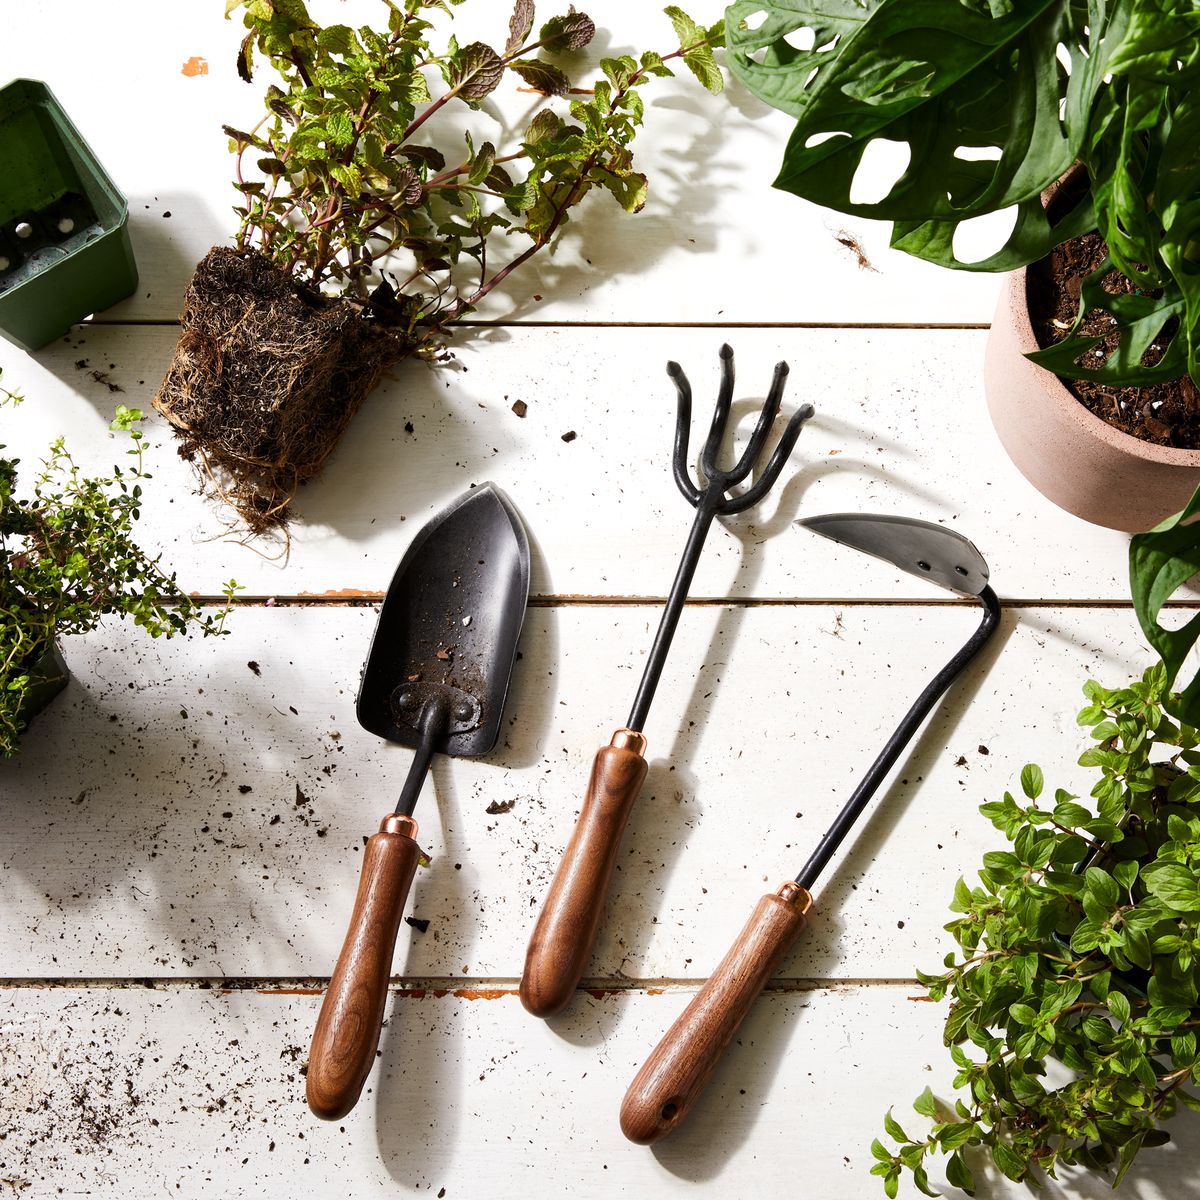 When it comes to gardening supplies, we have your covered. Check out our website for the latest! #gardening #gardeningtools #gardeningsupplies #garden #gardenlife #gardenlove #gardenideas #gardendesign #gardeningtips